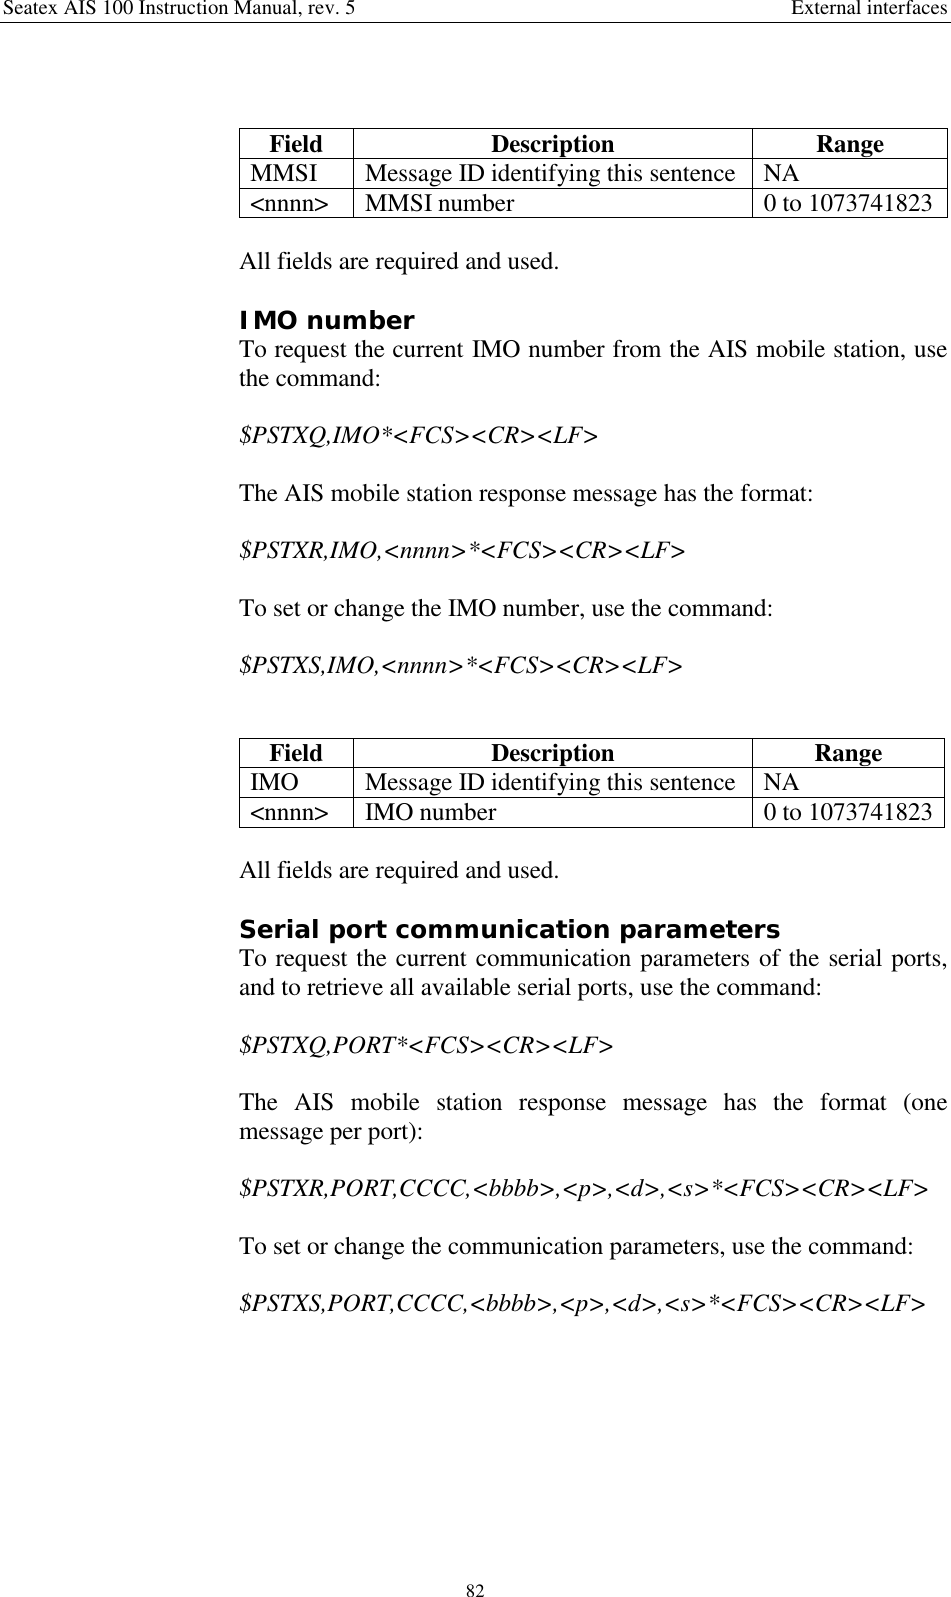 Seatex AIS 100 Instruction Manual, rev. 5 External interfaces82Field Description RangeMMSI Message ID identifying this sentence NA&lt;nnnn&gt; MMSI number 0 to 1073741823All fields are required and used.IMO numberTo request the current IMO number from the AIS mobile station, usethe command:$PSTXQ,IMO*&lt;FCS&gt;&lt;CR&gt;&lt;LF&gt;The AIS mobile station response message has the format:$PSTXR,IMO,&lt;nnnn&gt;*&lt;FCS&gt;&lt;CR&gt;&lt;LF&gt;To set or change the IMO number, use the command:$PSTXS,IMO,&lt;nnnn&gt;*&lt;FCS&gt;&lt;CR&gt;&lt;LF&gt;Field Description RangeIMO Message ID identifying this sentence NA&lt;nnnn&gt; IMO number 0 to 1073741823All fields are required and used.Serial port communication parametersTo request the current communication parameters of the serial ports,and to retrieve all available serial ports, use the command:$PSTXQ,PORT*&lt;FCS&gt;&lt;CR&gt;&lt;LF&gt;The AIS mobile station response message has the format (onemessage per port):$PSTXR,PORT,CCCC,&lt;bbbb&gt;,&lt;p&gt;,&lt;d&gt;,&lt;s&gt;*&lt;FCS&gt;&lt;CR&gt;&lt;LF&gt;To set or change the communication parameters, use the command:$PSTXS,PORT,CCCC,&lt;bbbb&gt;,&lt;p&gt;,&lt;d&gt;,&lt;s&gt;*&lt;FCS&gt;&lt;CR&gt;&lt;LF&gt;